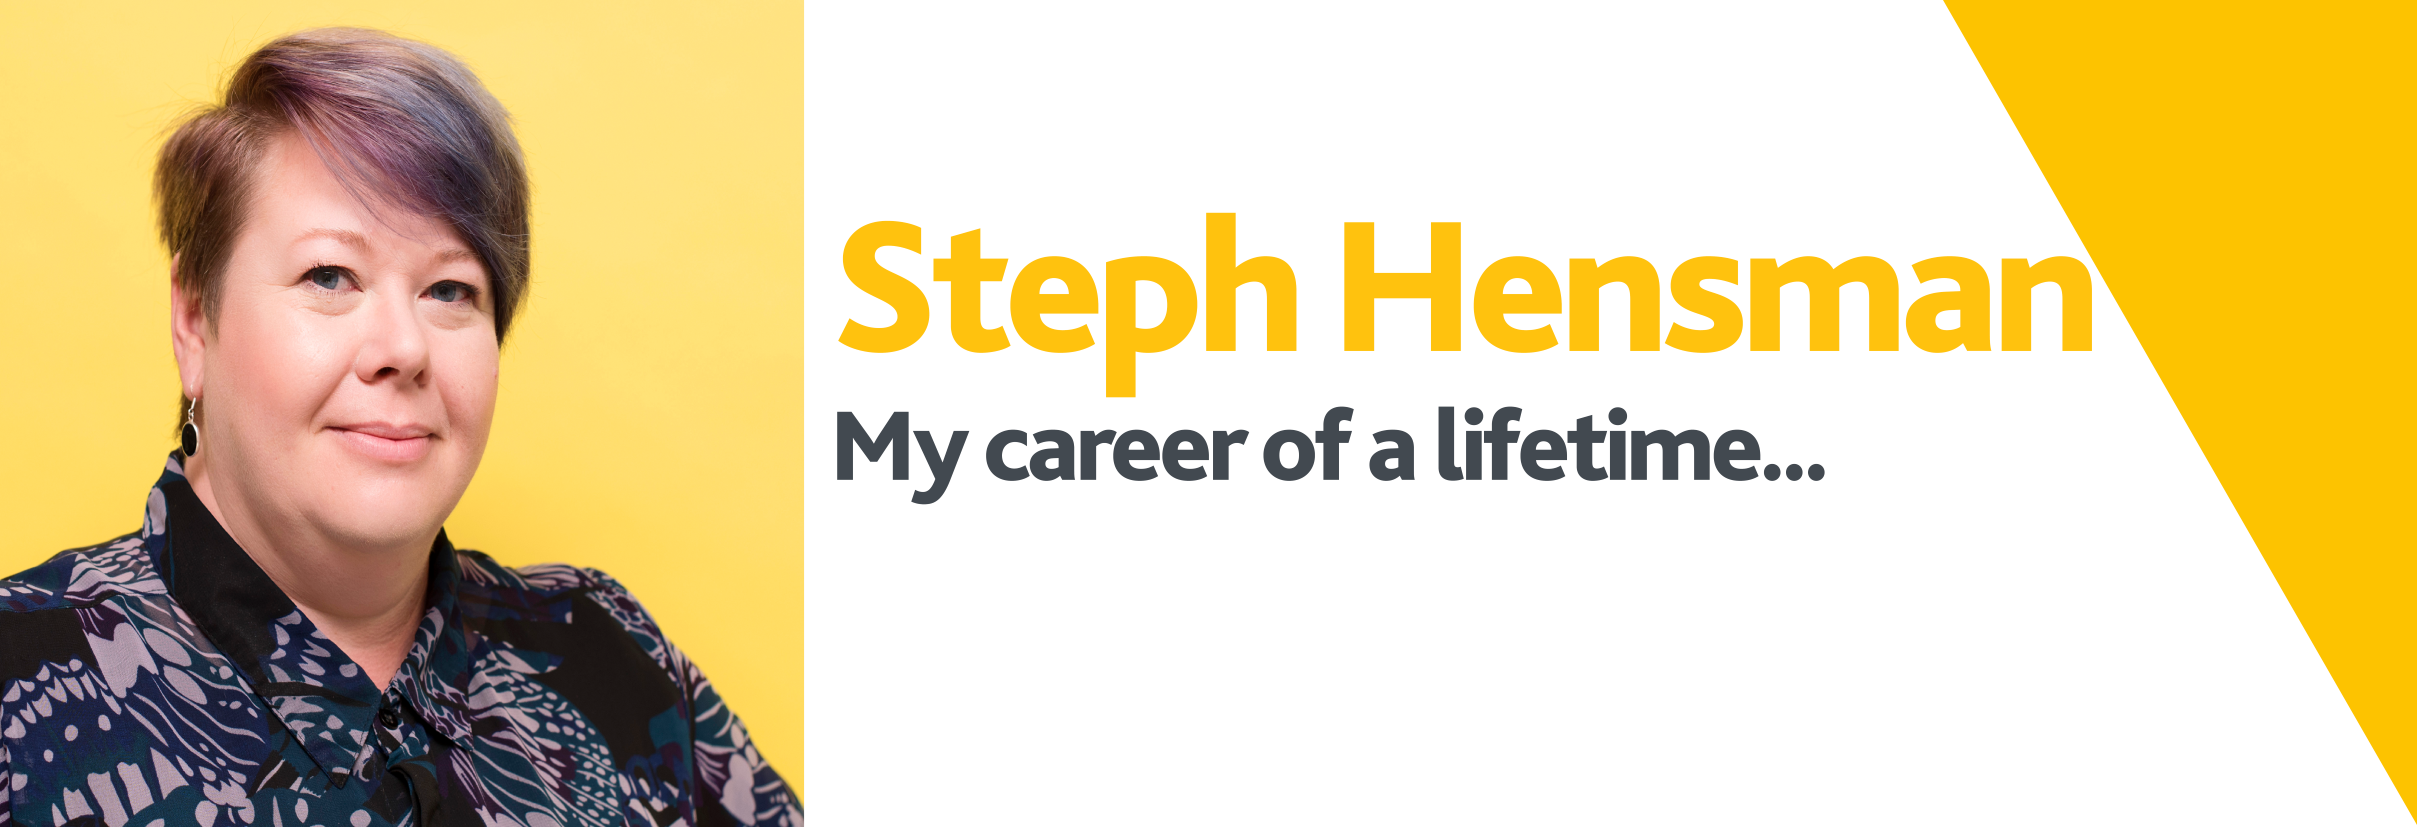 Career of a lifetime - Steph.png